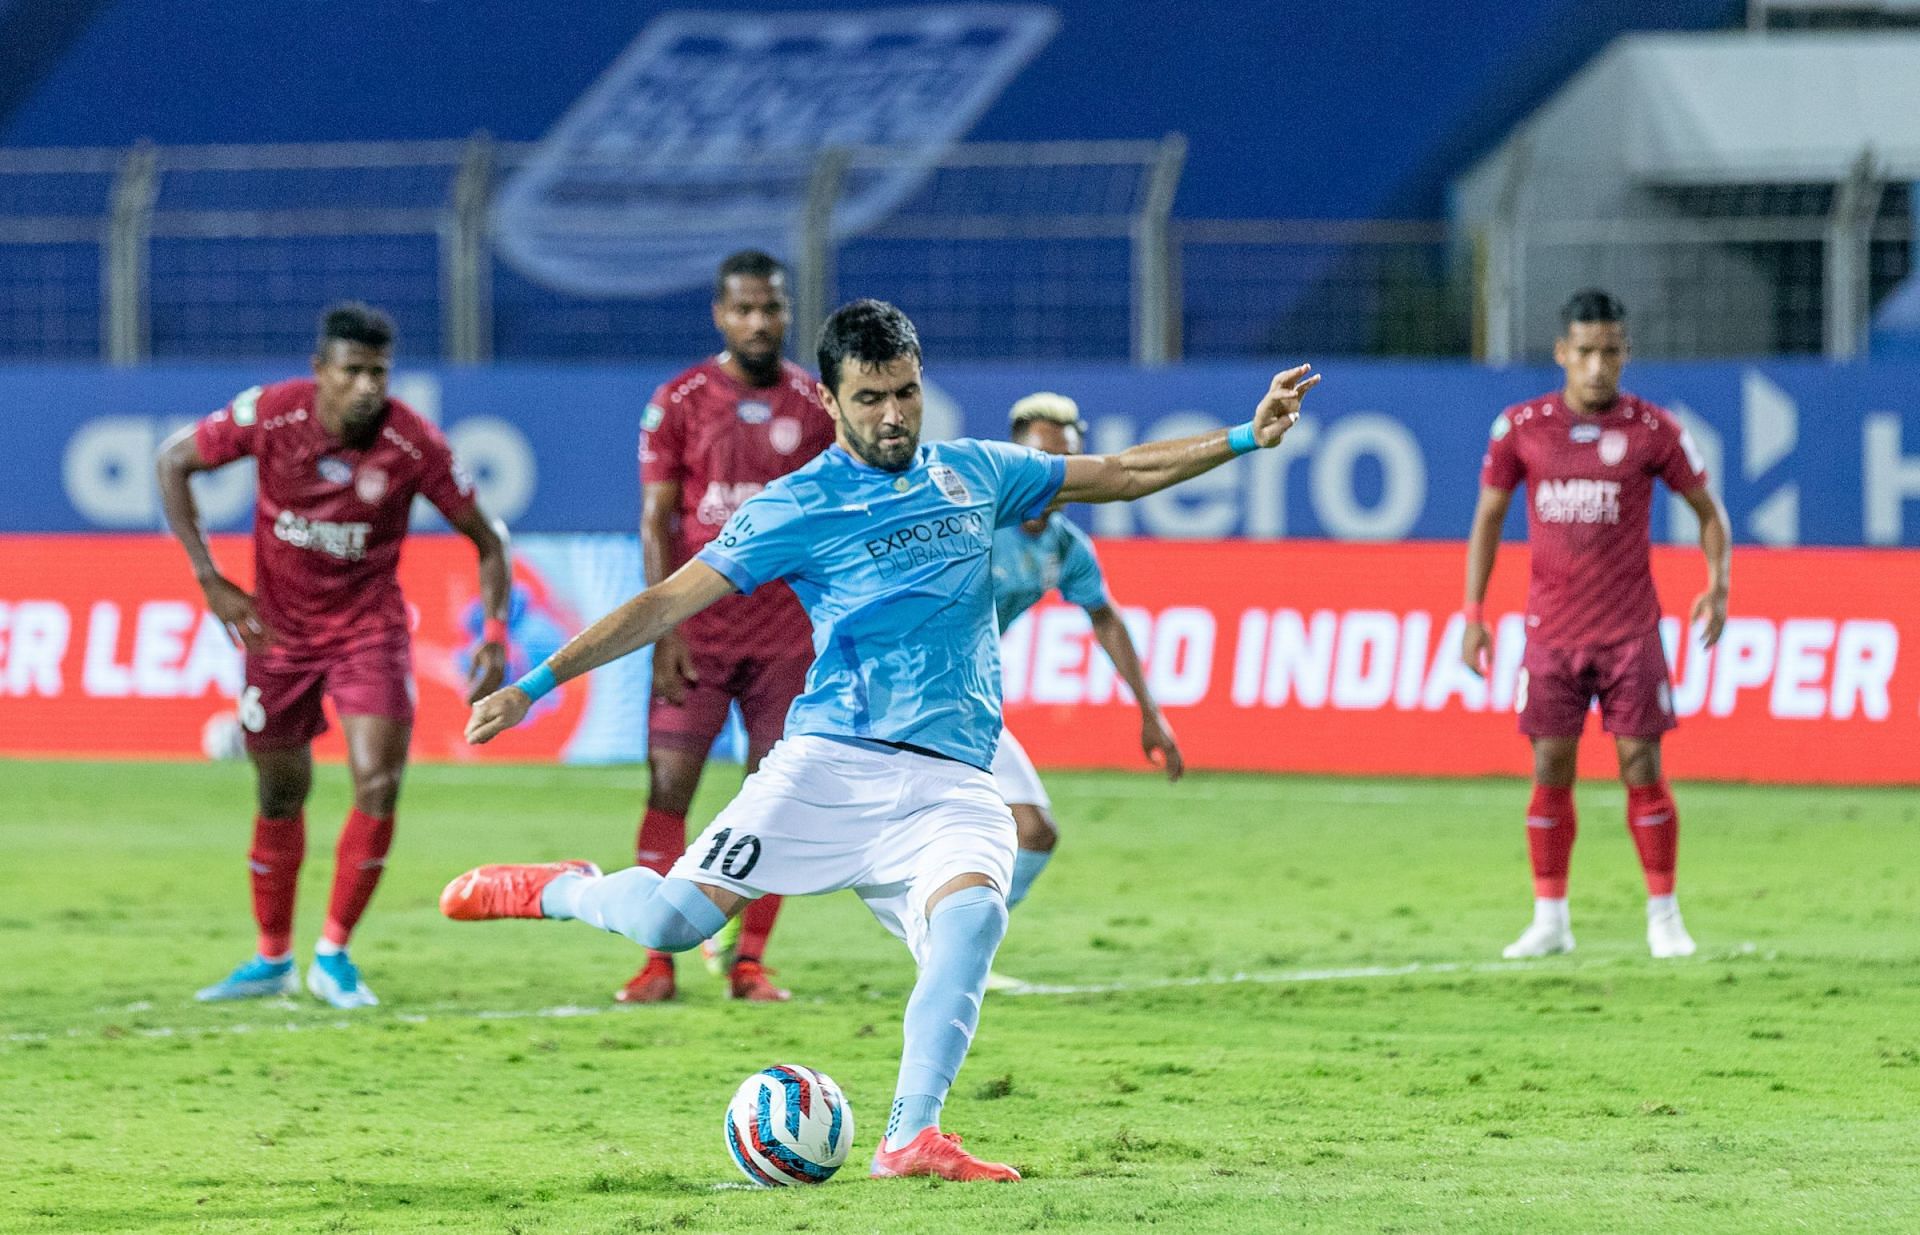 Ahmed Jahouh converted from the penalty spot for Mumbai City FC (PC:ISL Media)